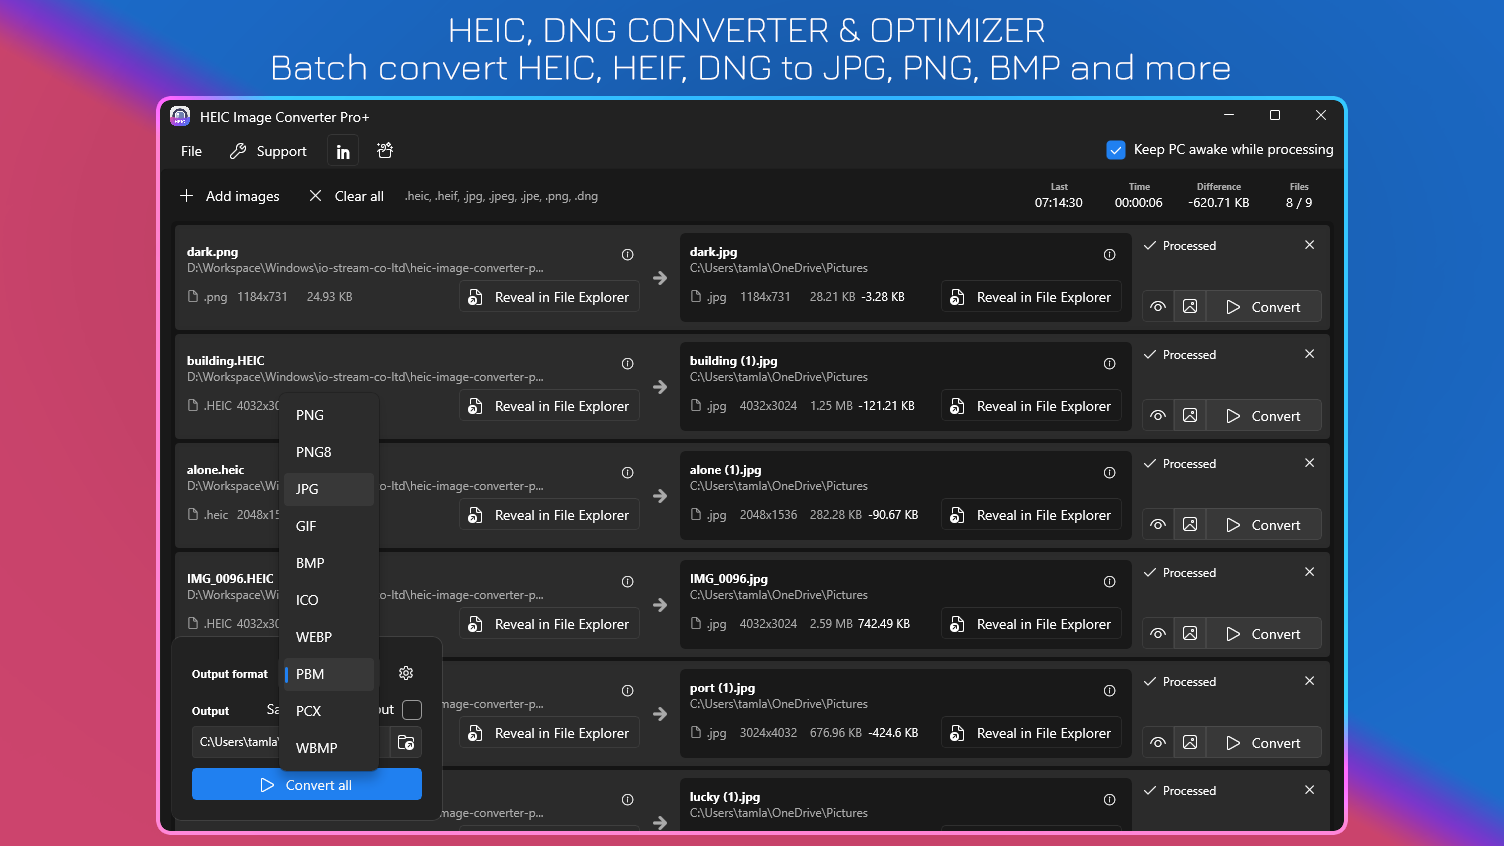 HEIC, DNG Image Converter & Optimizer - Batch convert HEIC, HEIF, DNG (ProRAW) to JPG, PNG, BMP and more